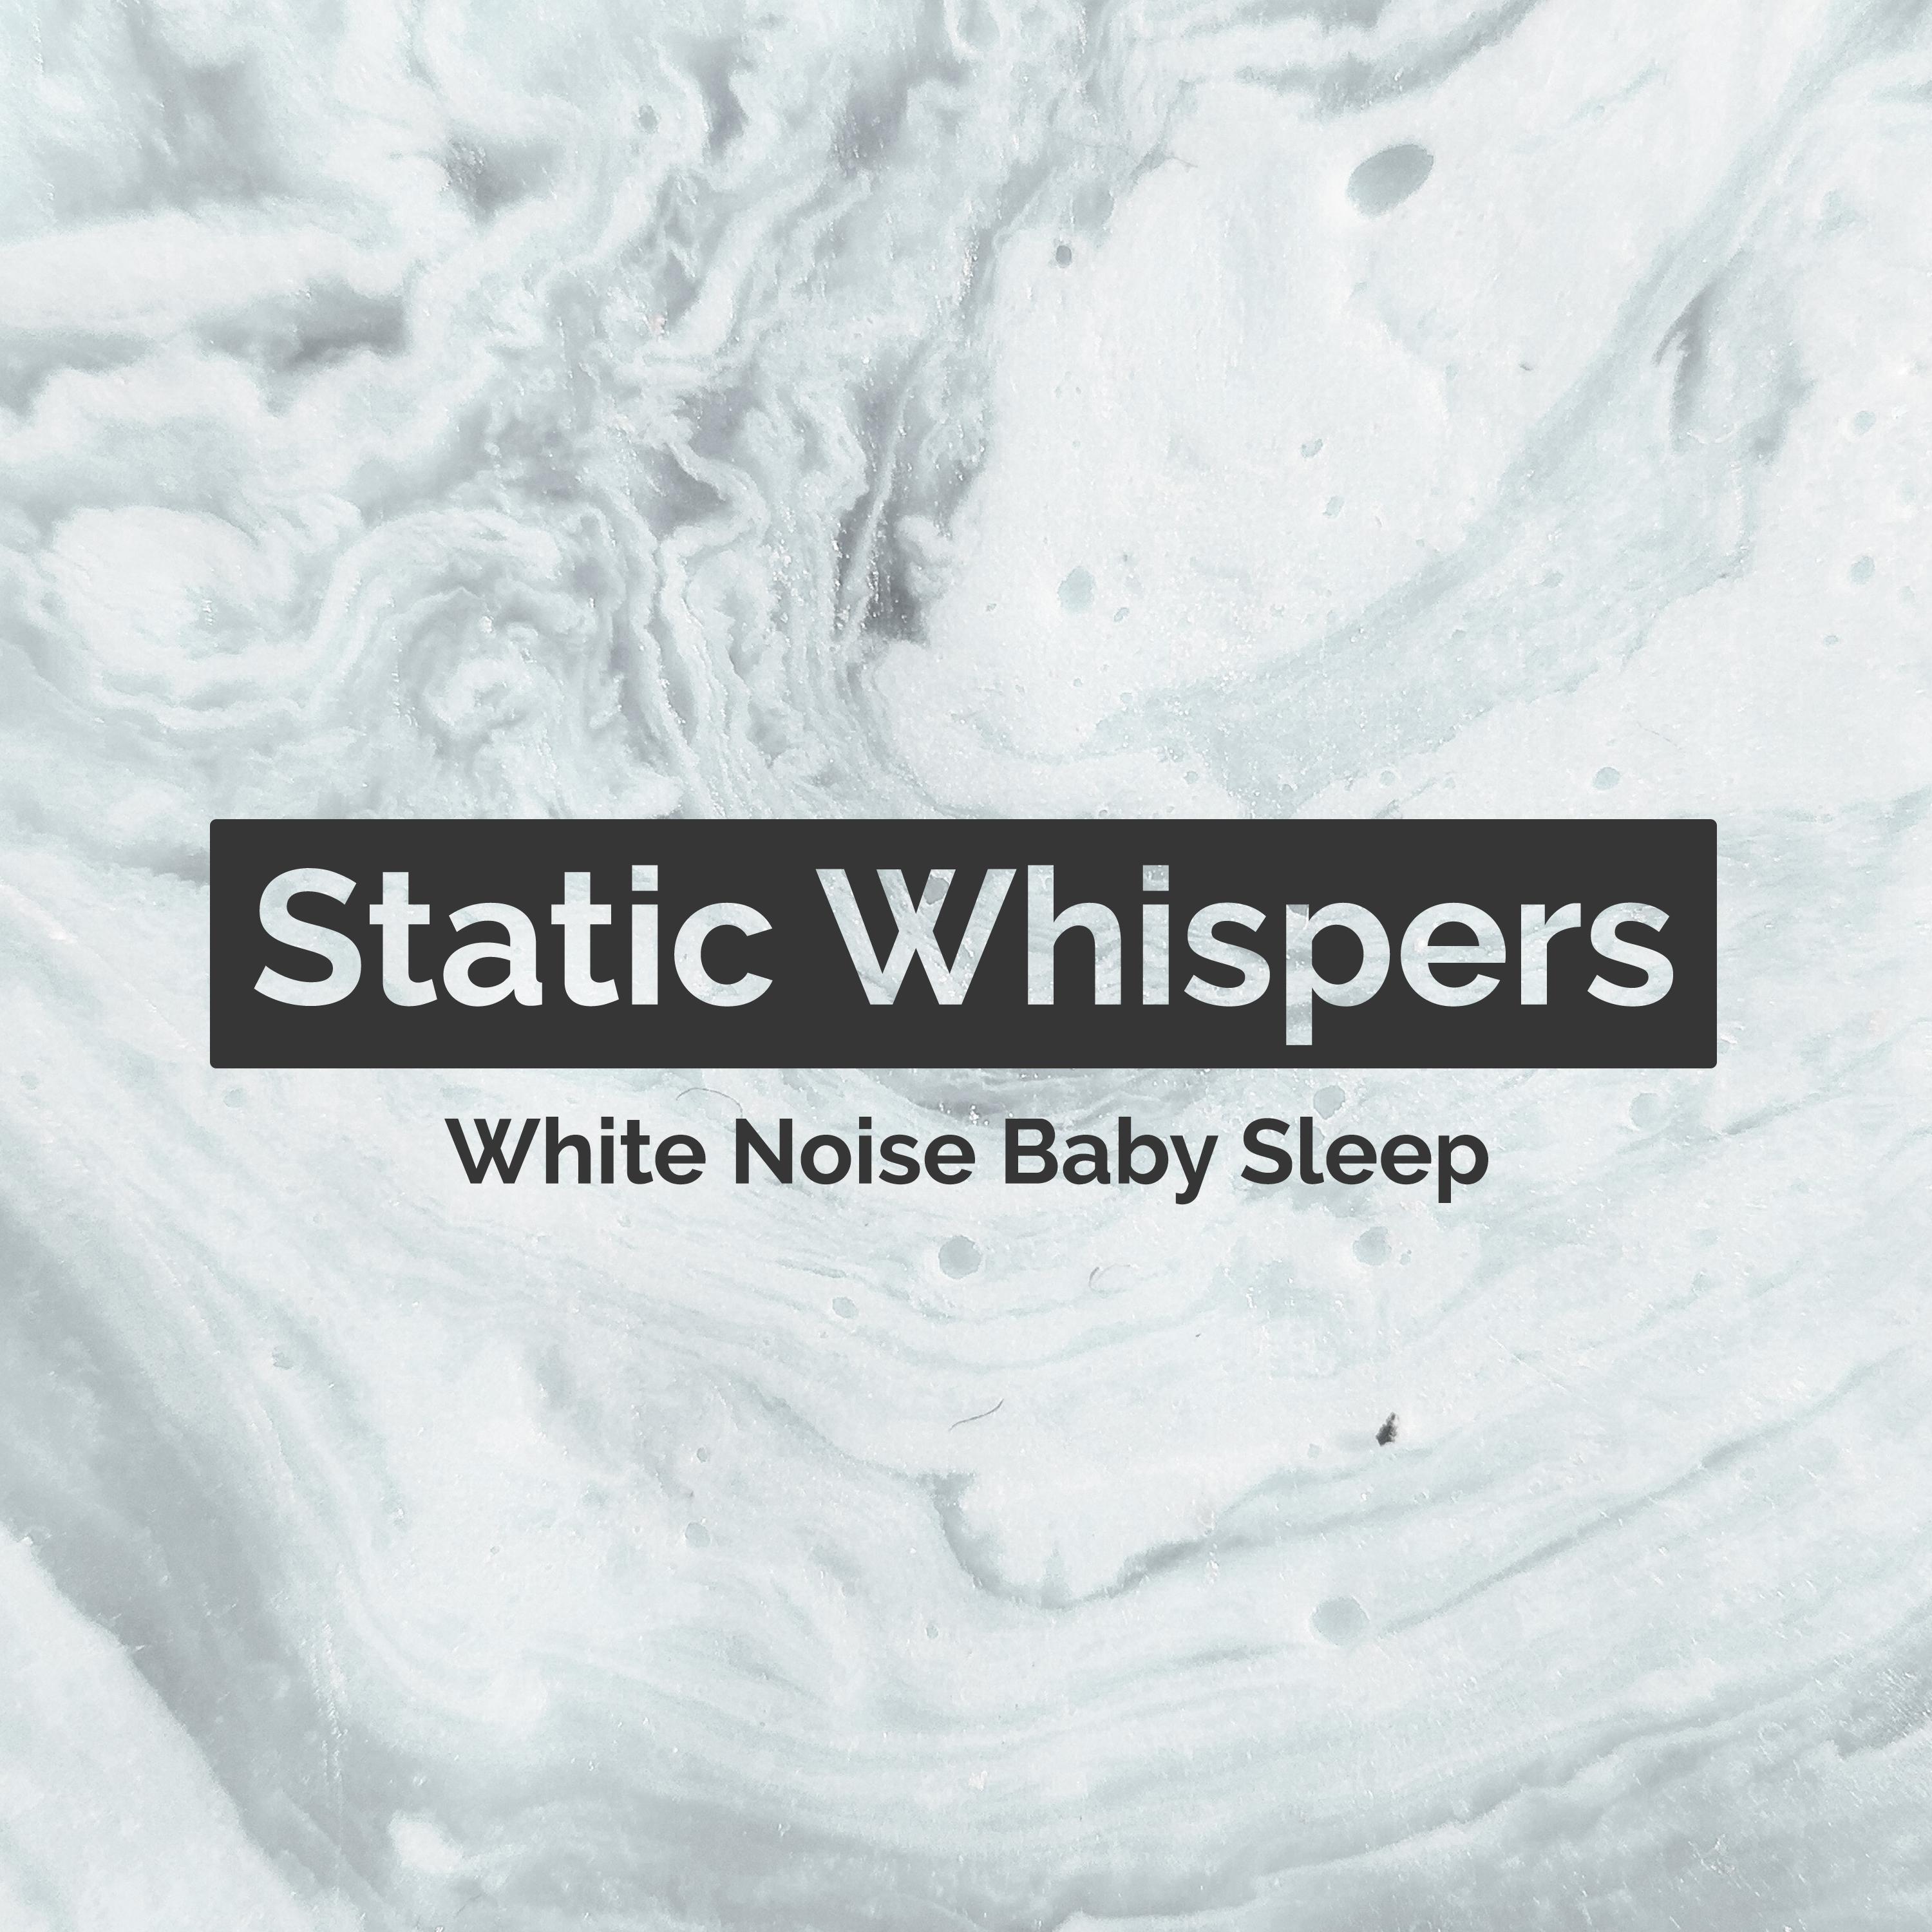 Static Whispers